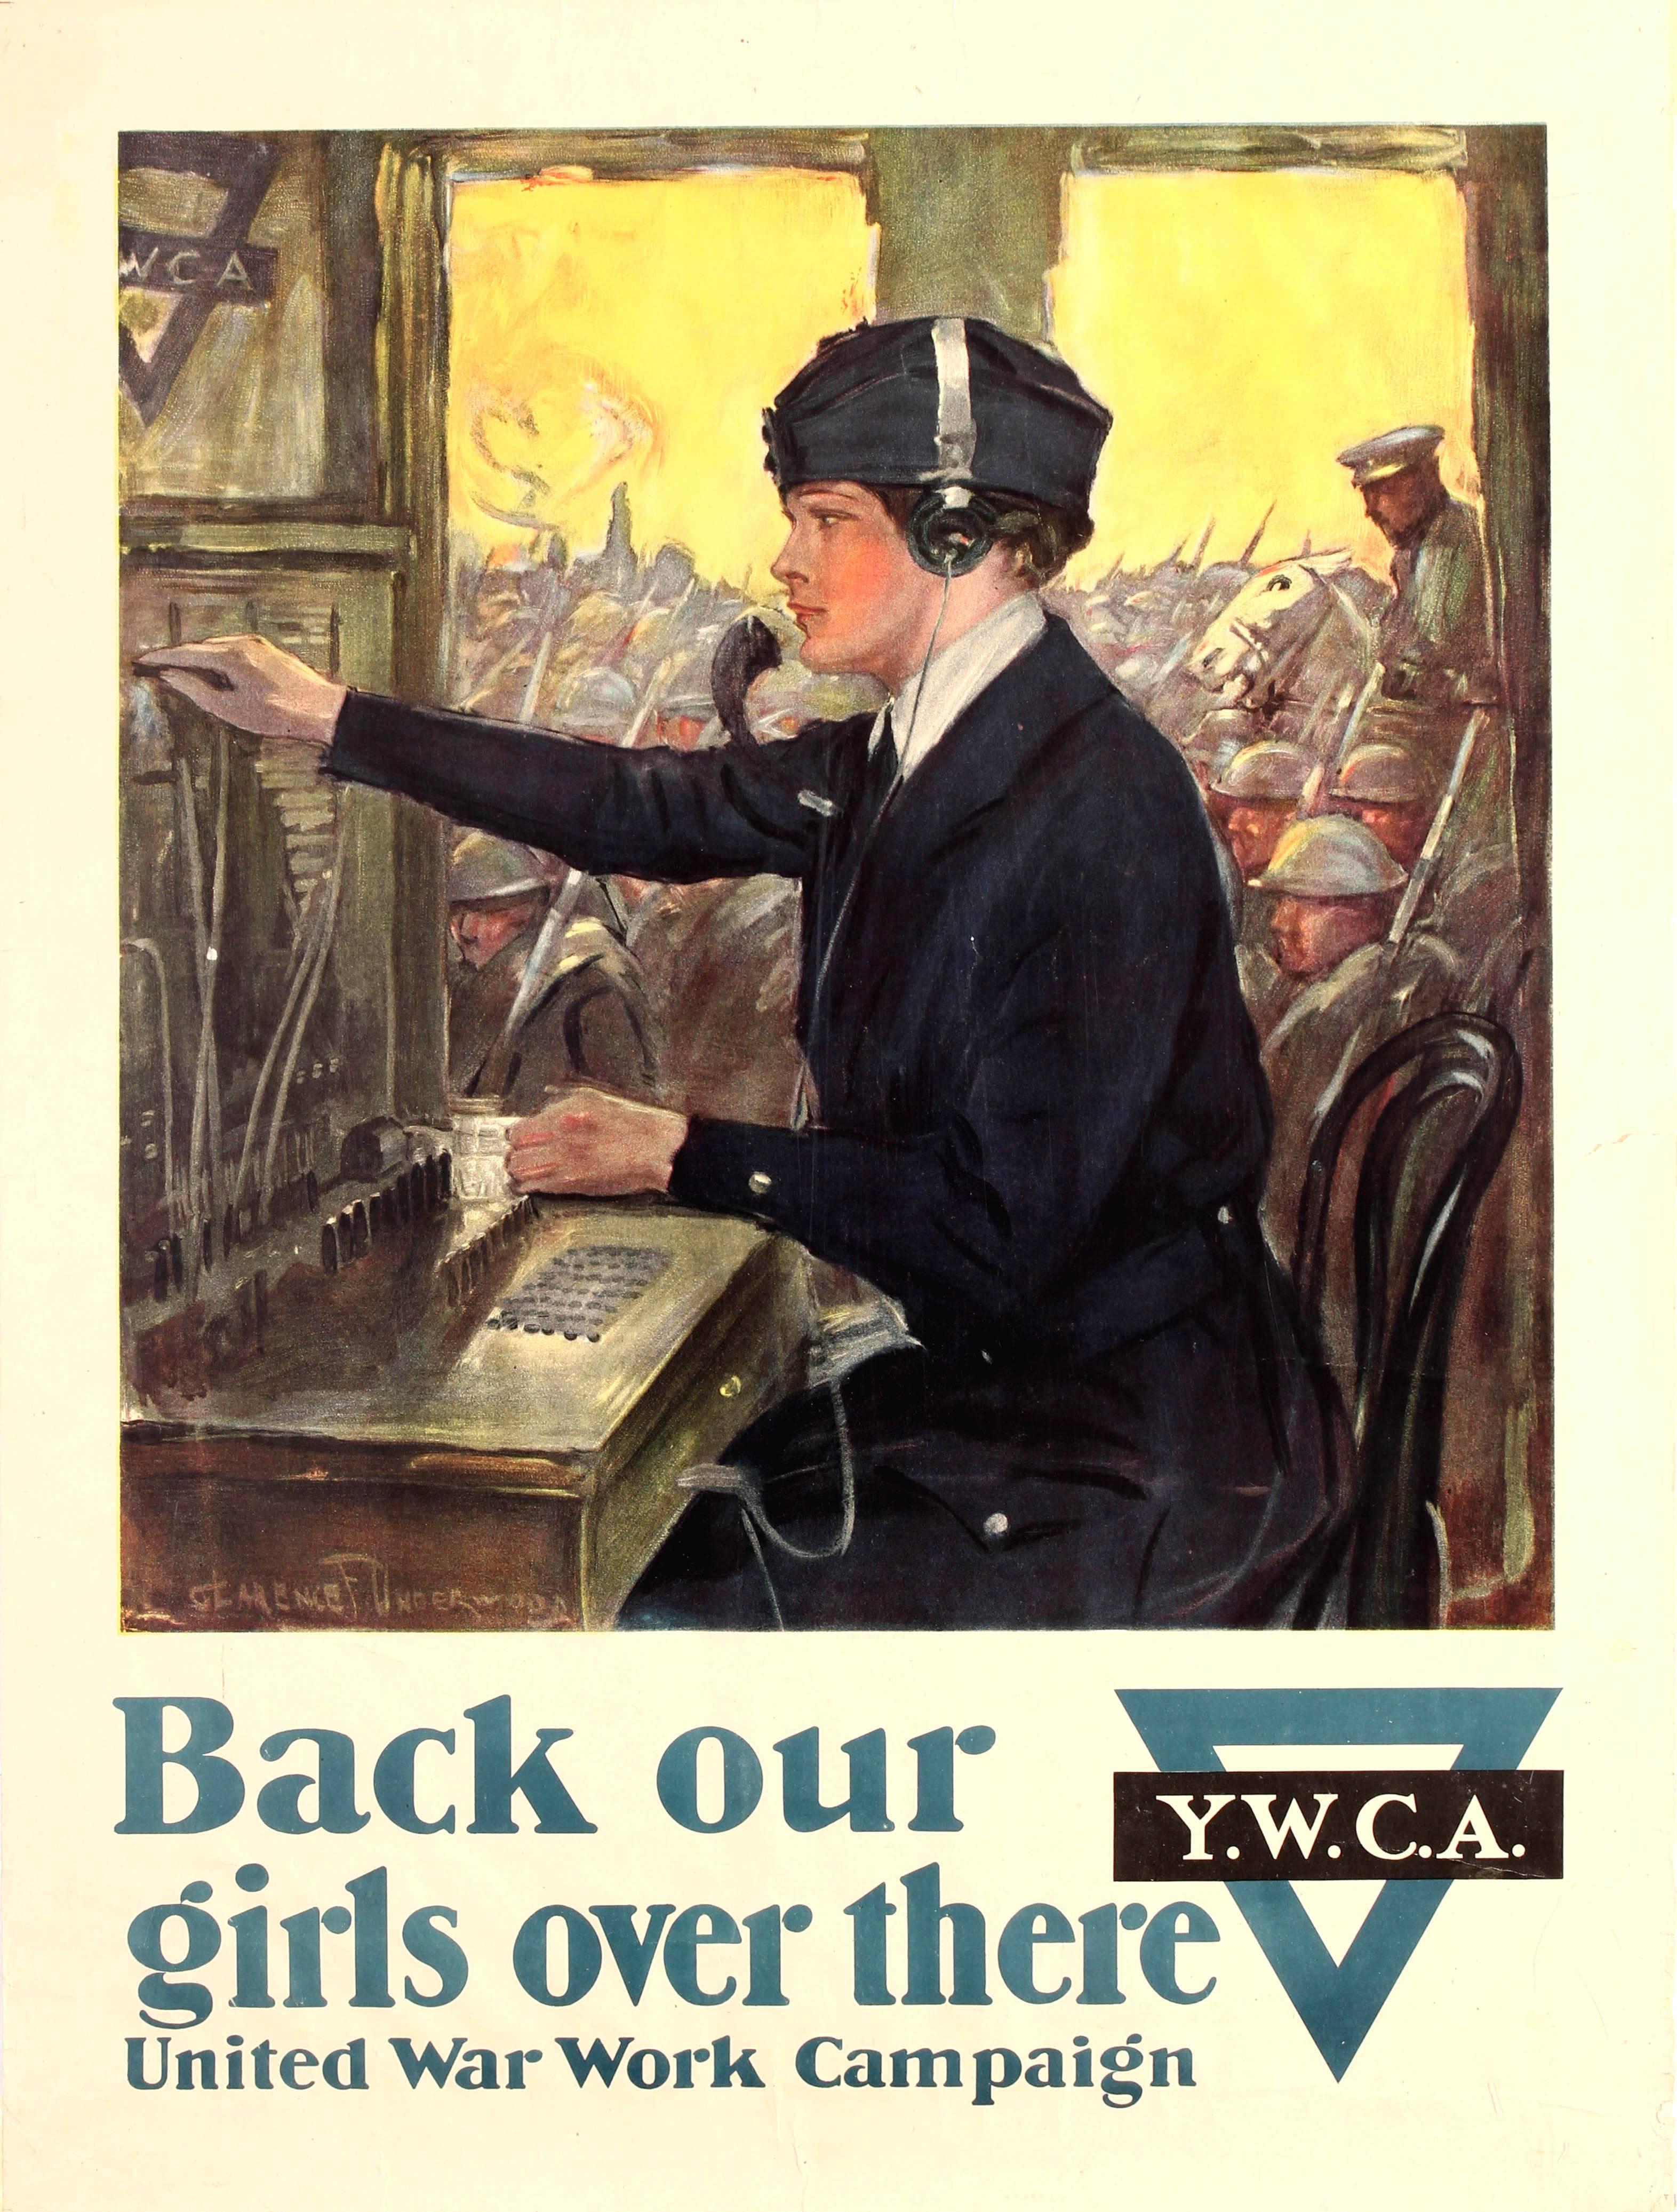 Clarence F. Underwood Print - Original WWI Y.W.C.A. United War Work Campaign Poster Back Our Girls Over There